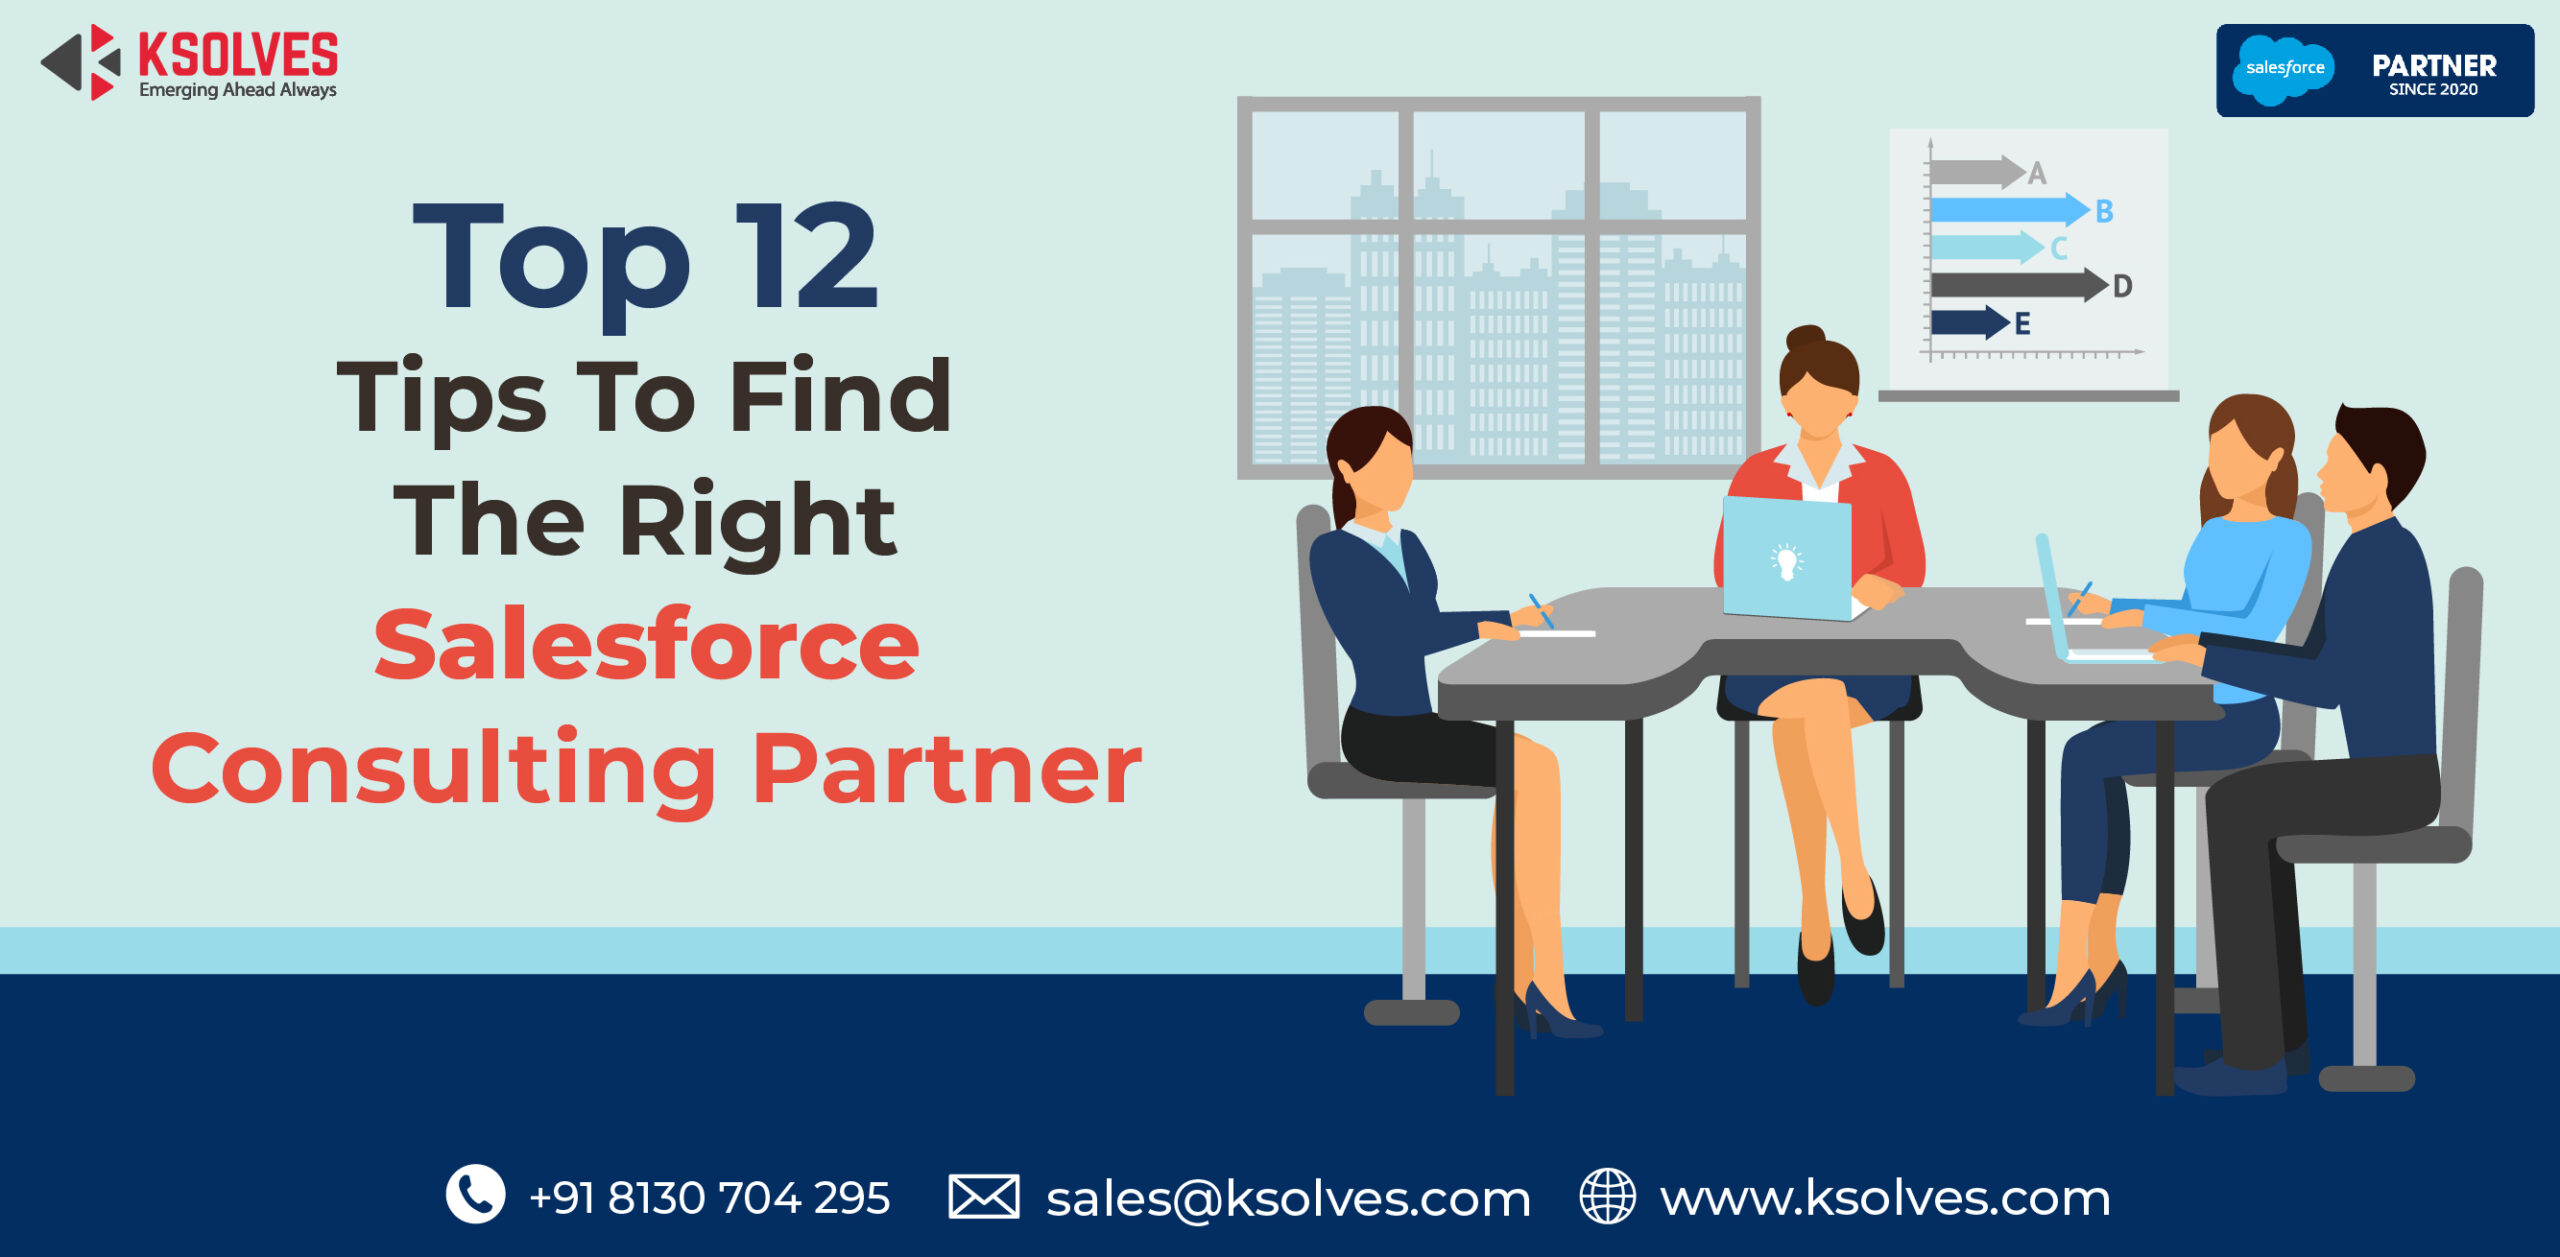 Top 12 tips to find the right salesforce consulting partner